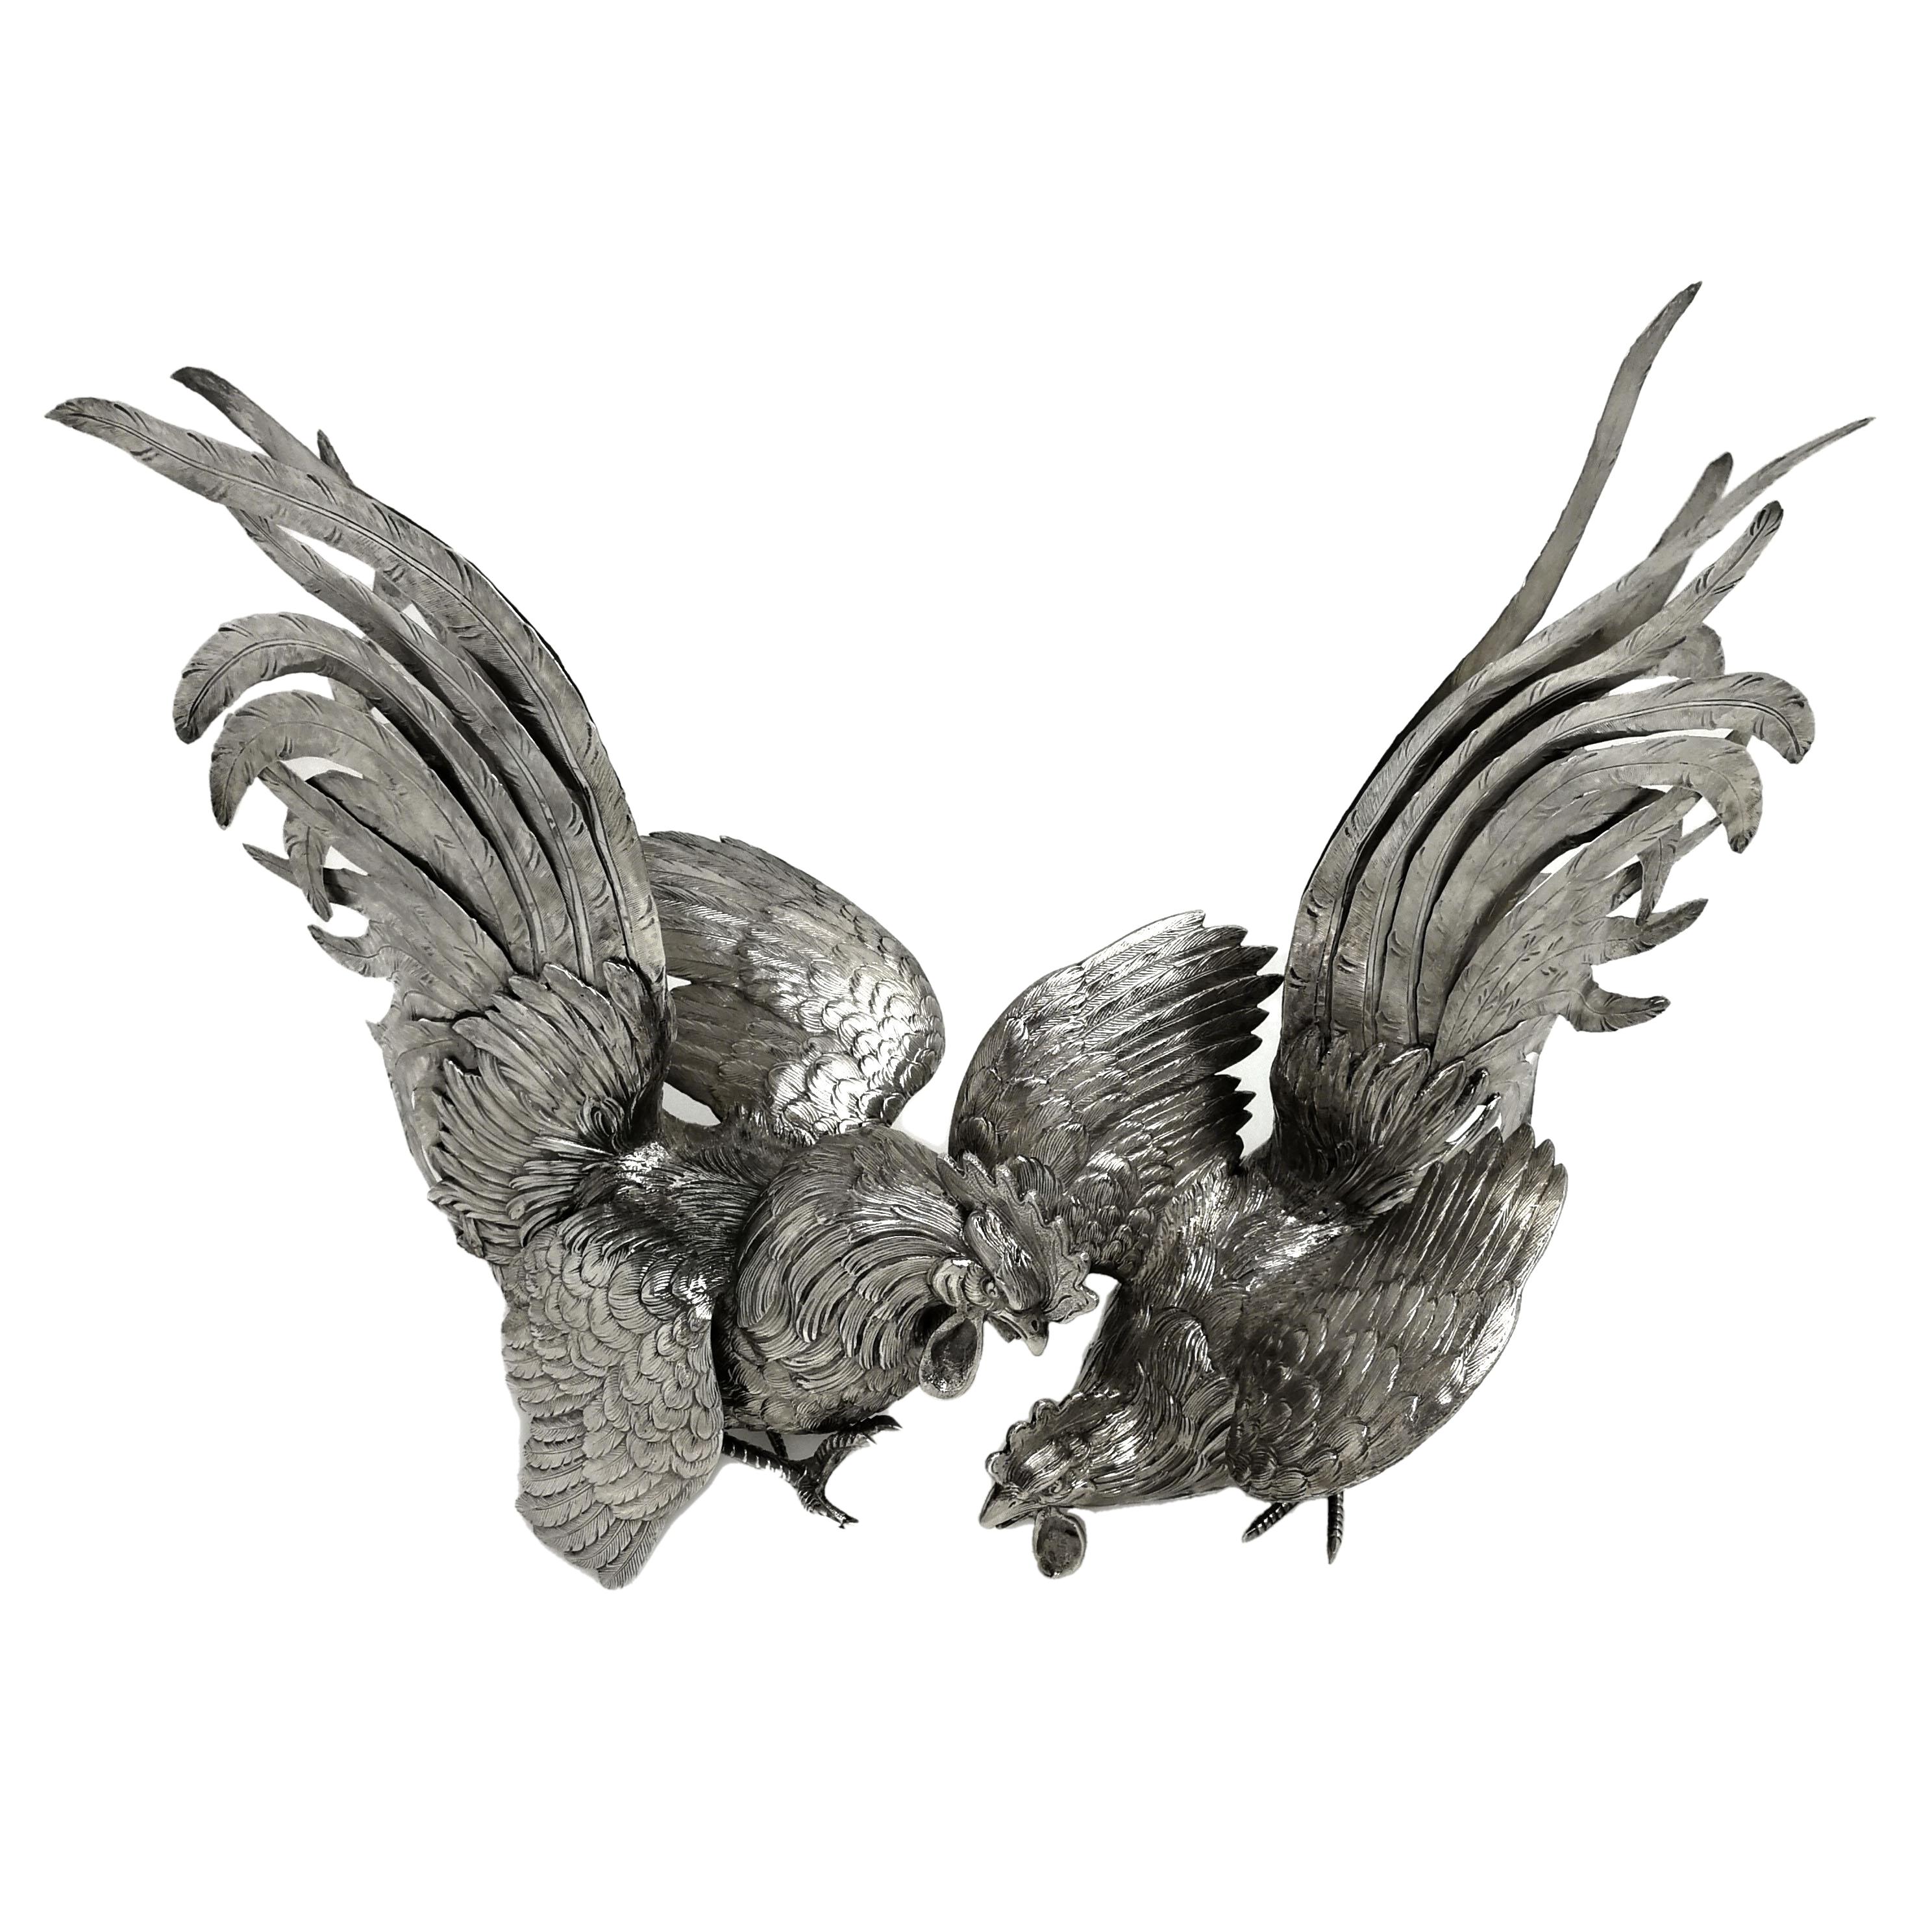 20th Century Large Dutch Antique Pair Silver Fighting Cockerels Roosters Models Figures c1900